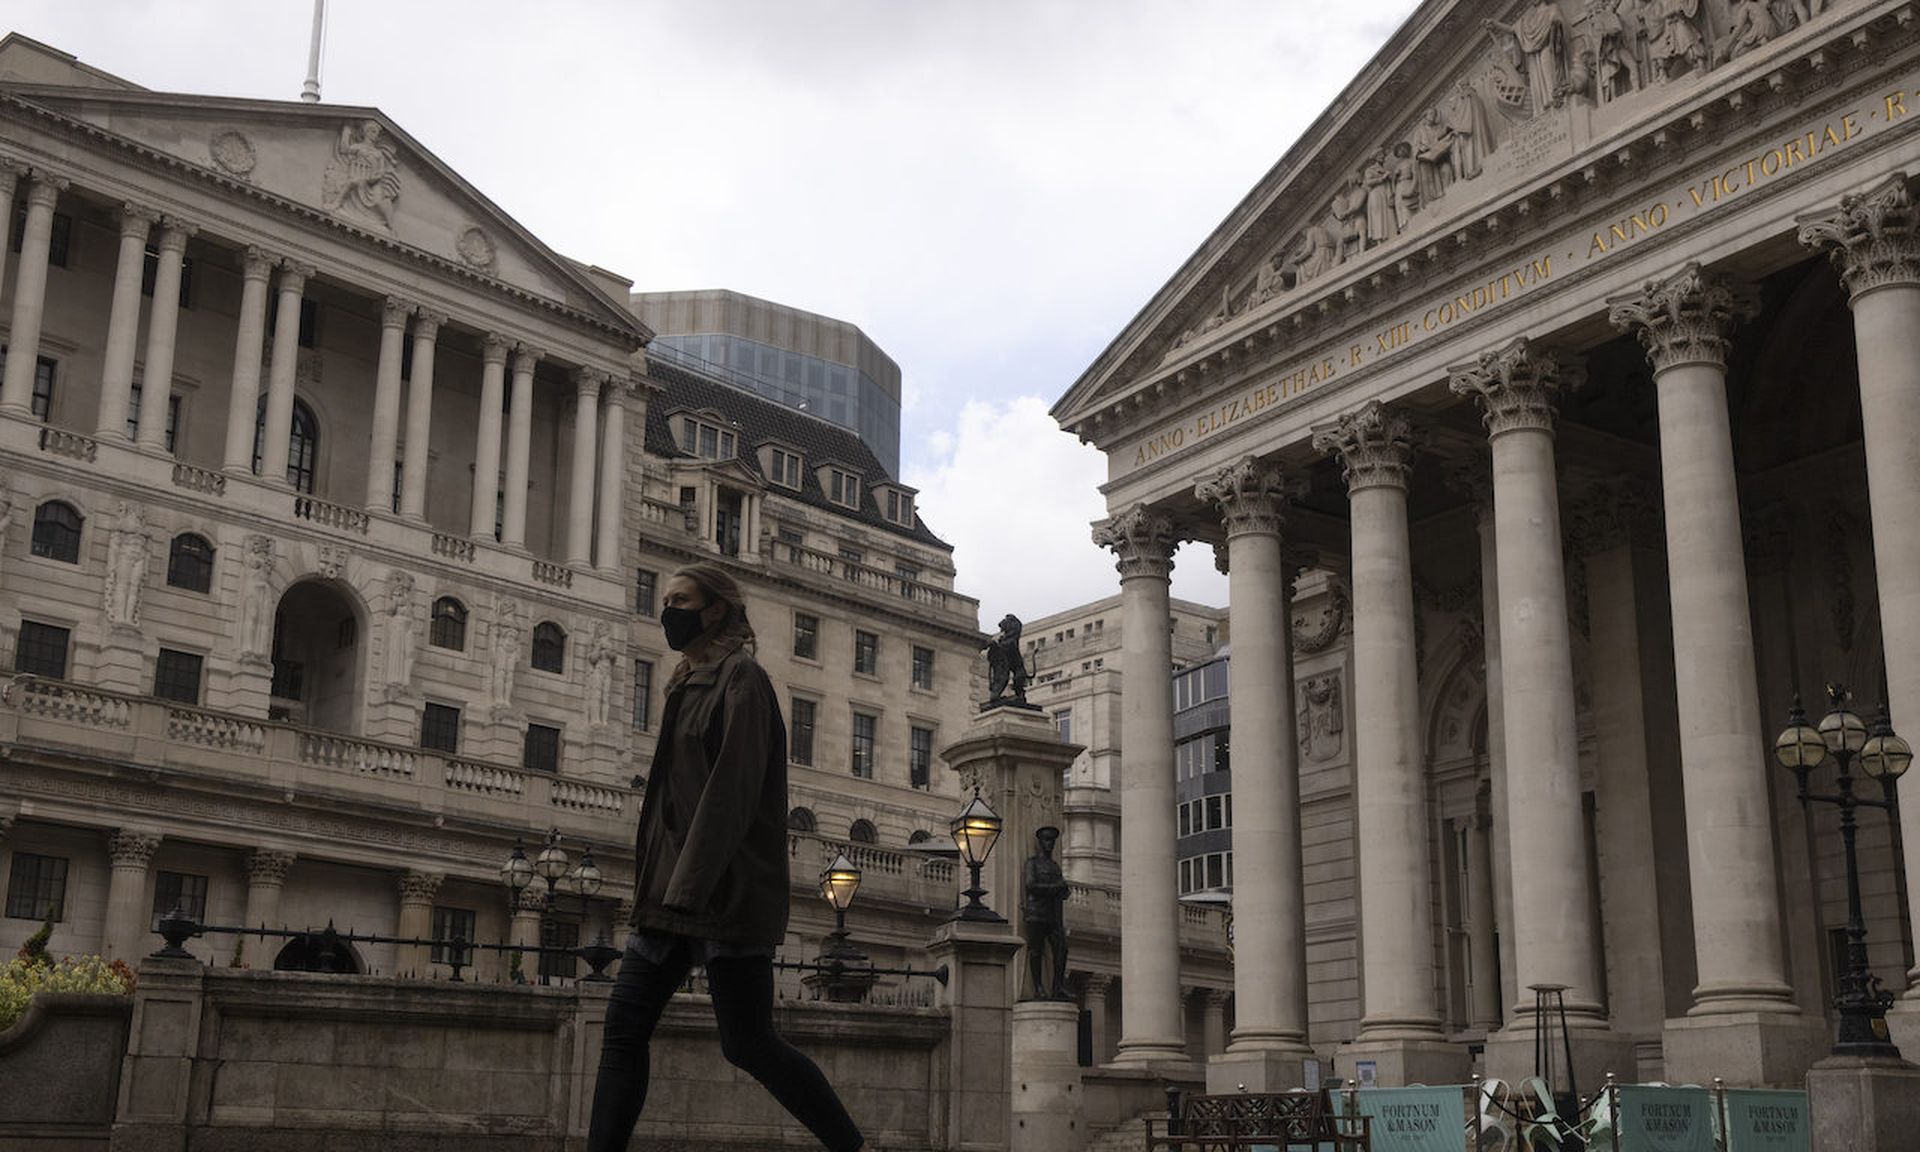 A woman walks past the Bank of England on May 18, 2021 in London. Today’s columnist, Tom Brennan of CREST USA, says he has worked closely with the Bank of England to work on a methodology to improve cyber threat intelligence. (Photo by Dan Kitwood/Getty Images)